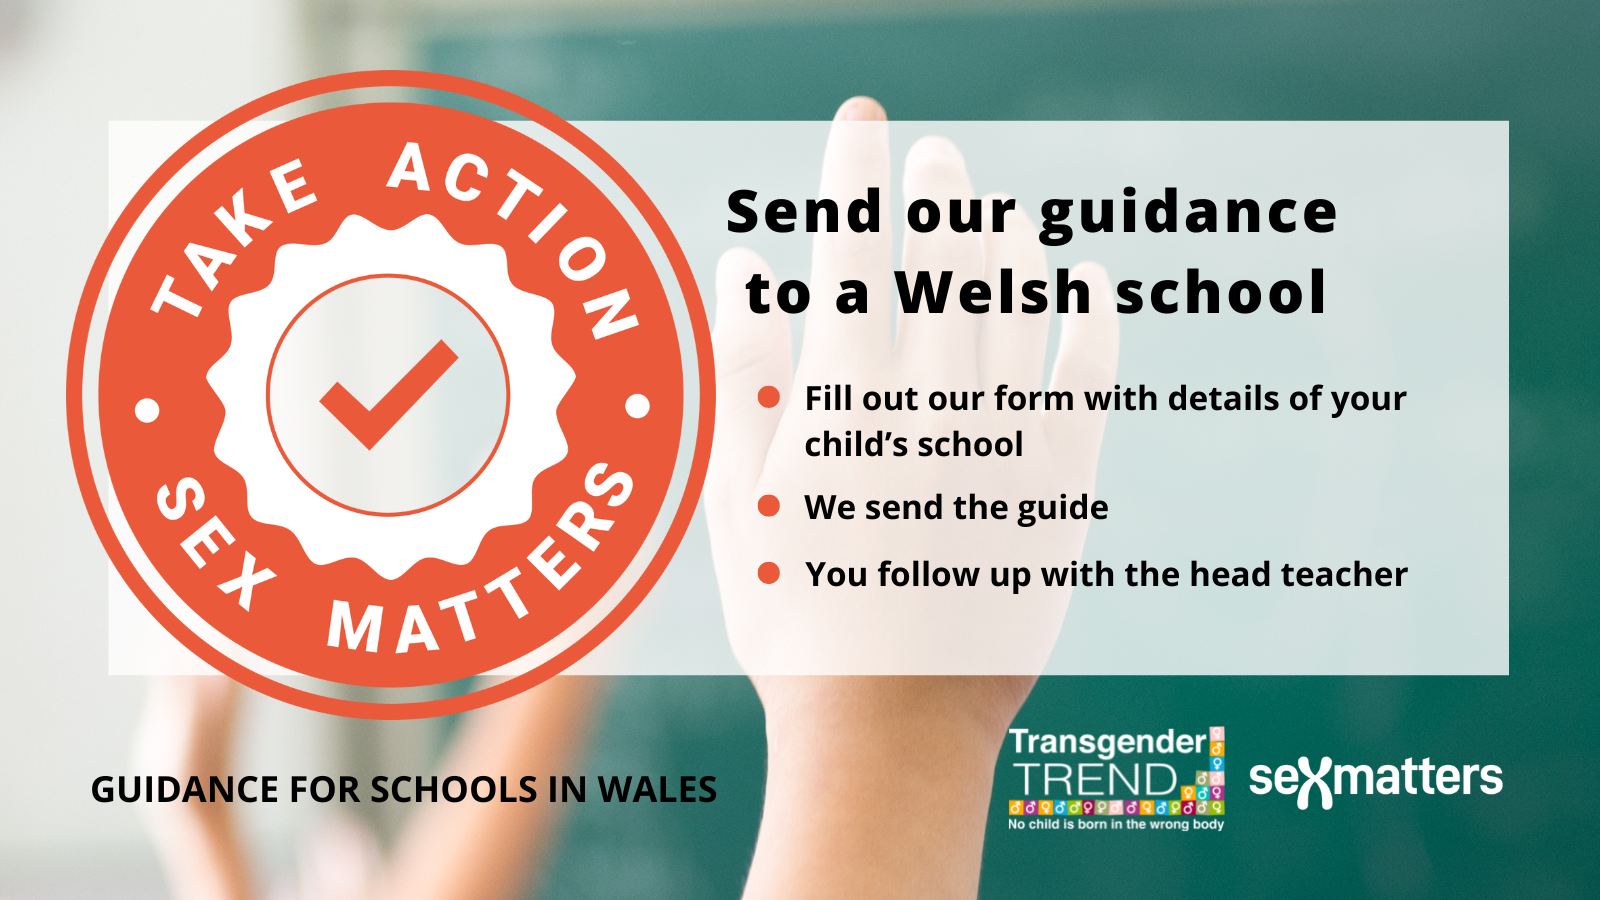 Send our guidance to a Welsh school Fill out our form with the school's details We send the guide You follow up with the head teacher